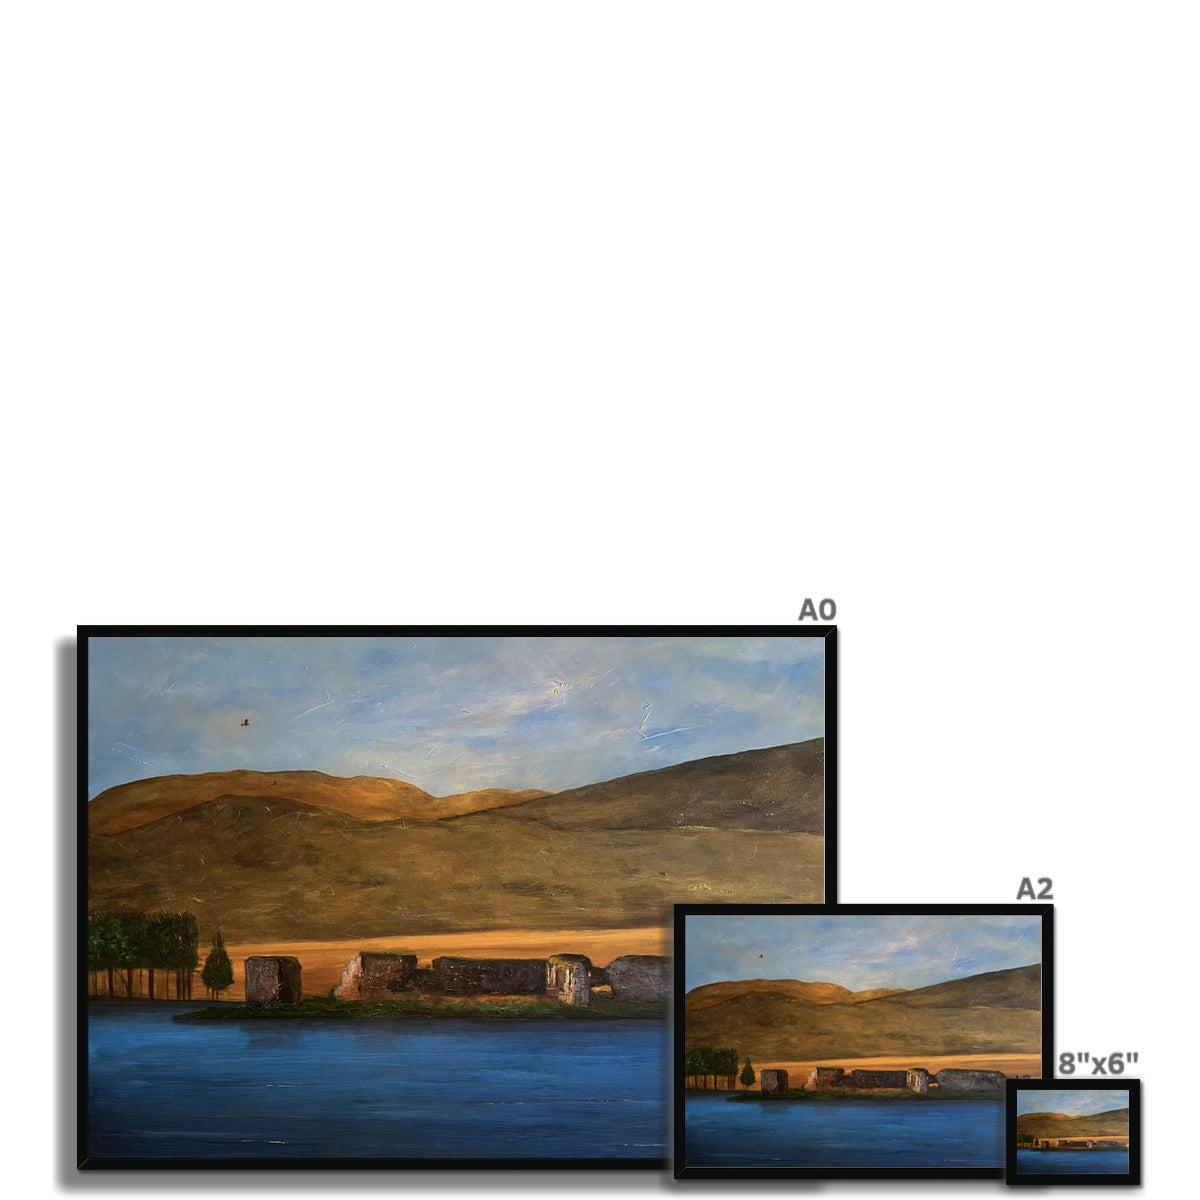 Lochindorb Castle Painting | Framed Prints From Scotland-Framed Prints-Scottish Lochs & Mountains Art Gallery-Paintings, Prints, Homeware, Art Gifts From Scotland By Scottish Artist Kevin Hunter